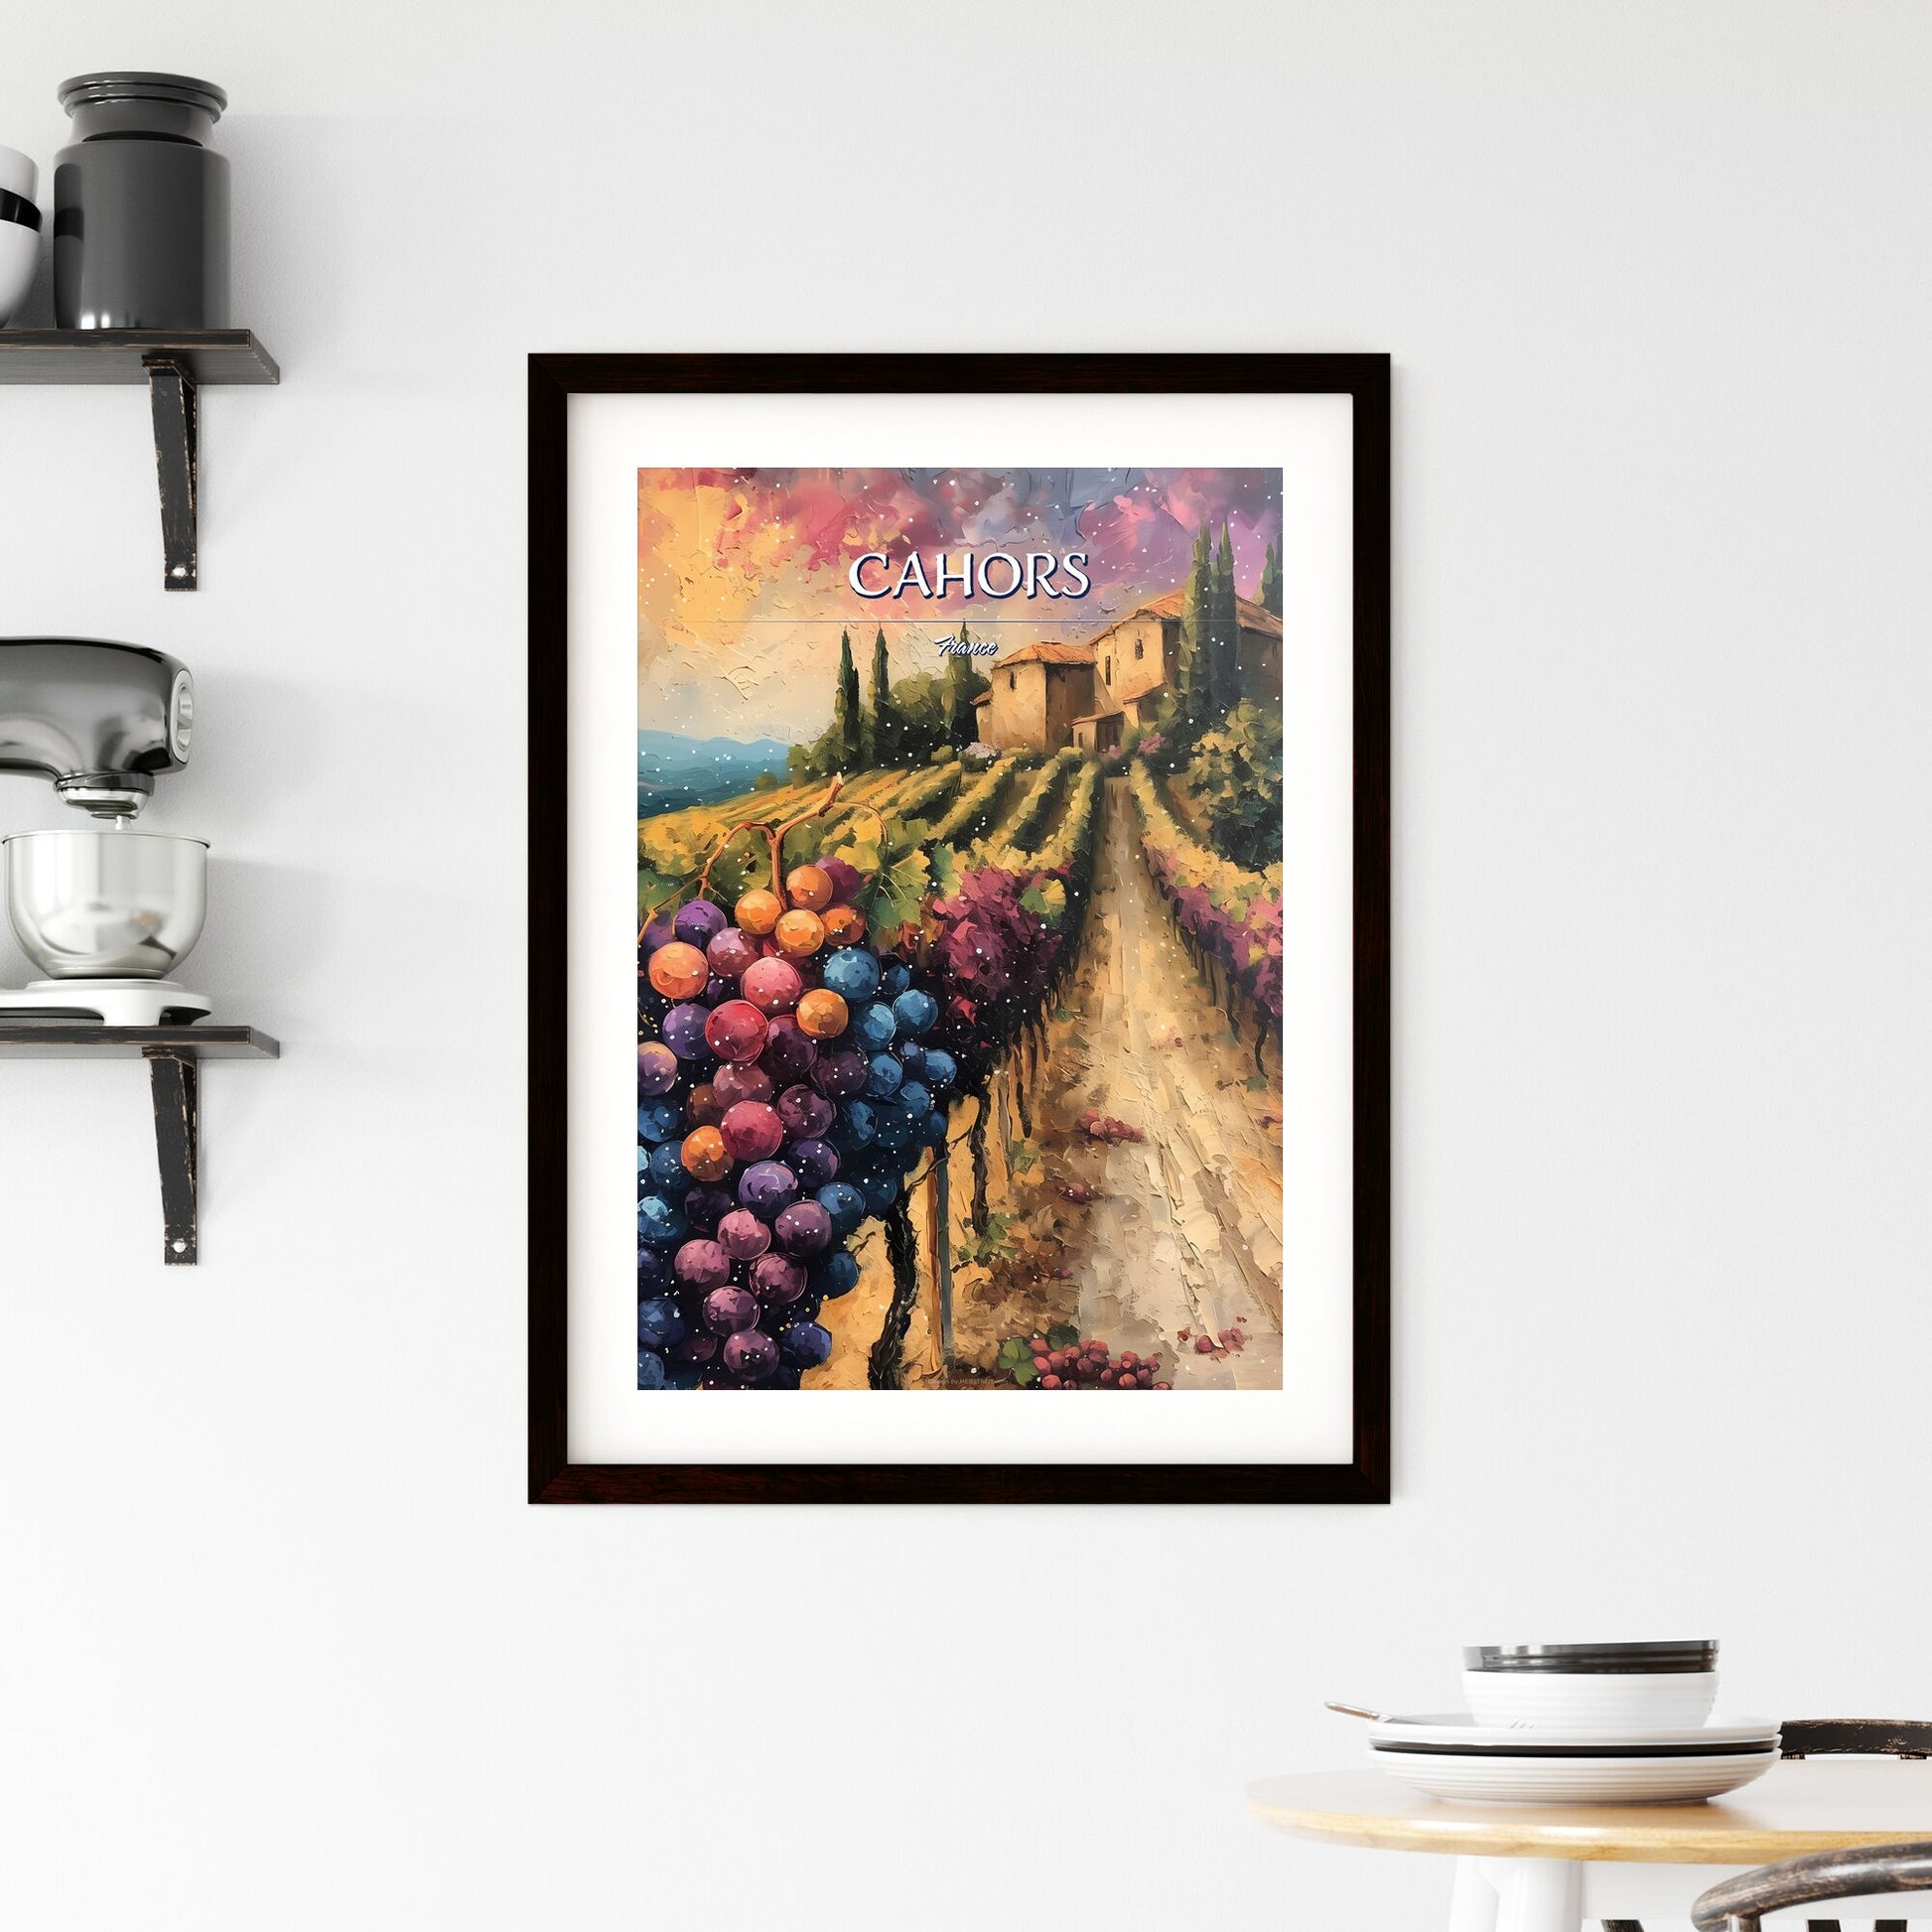 Cahors, France - Art print of a painting of a vineyard and a house Default Title